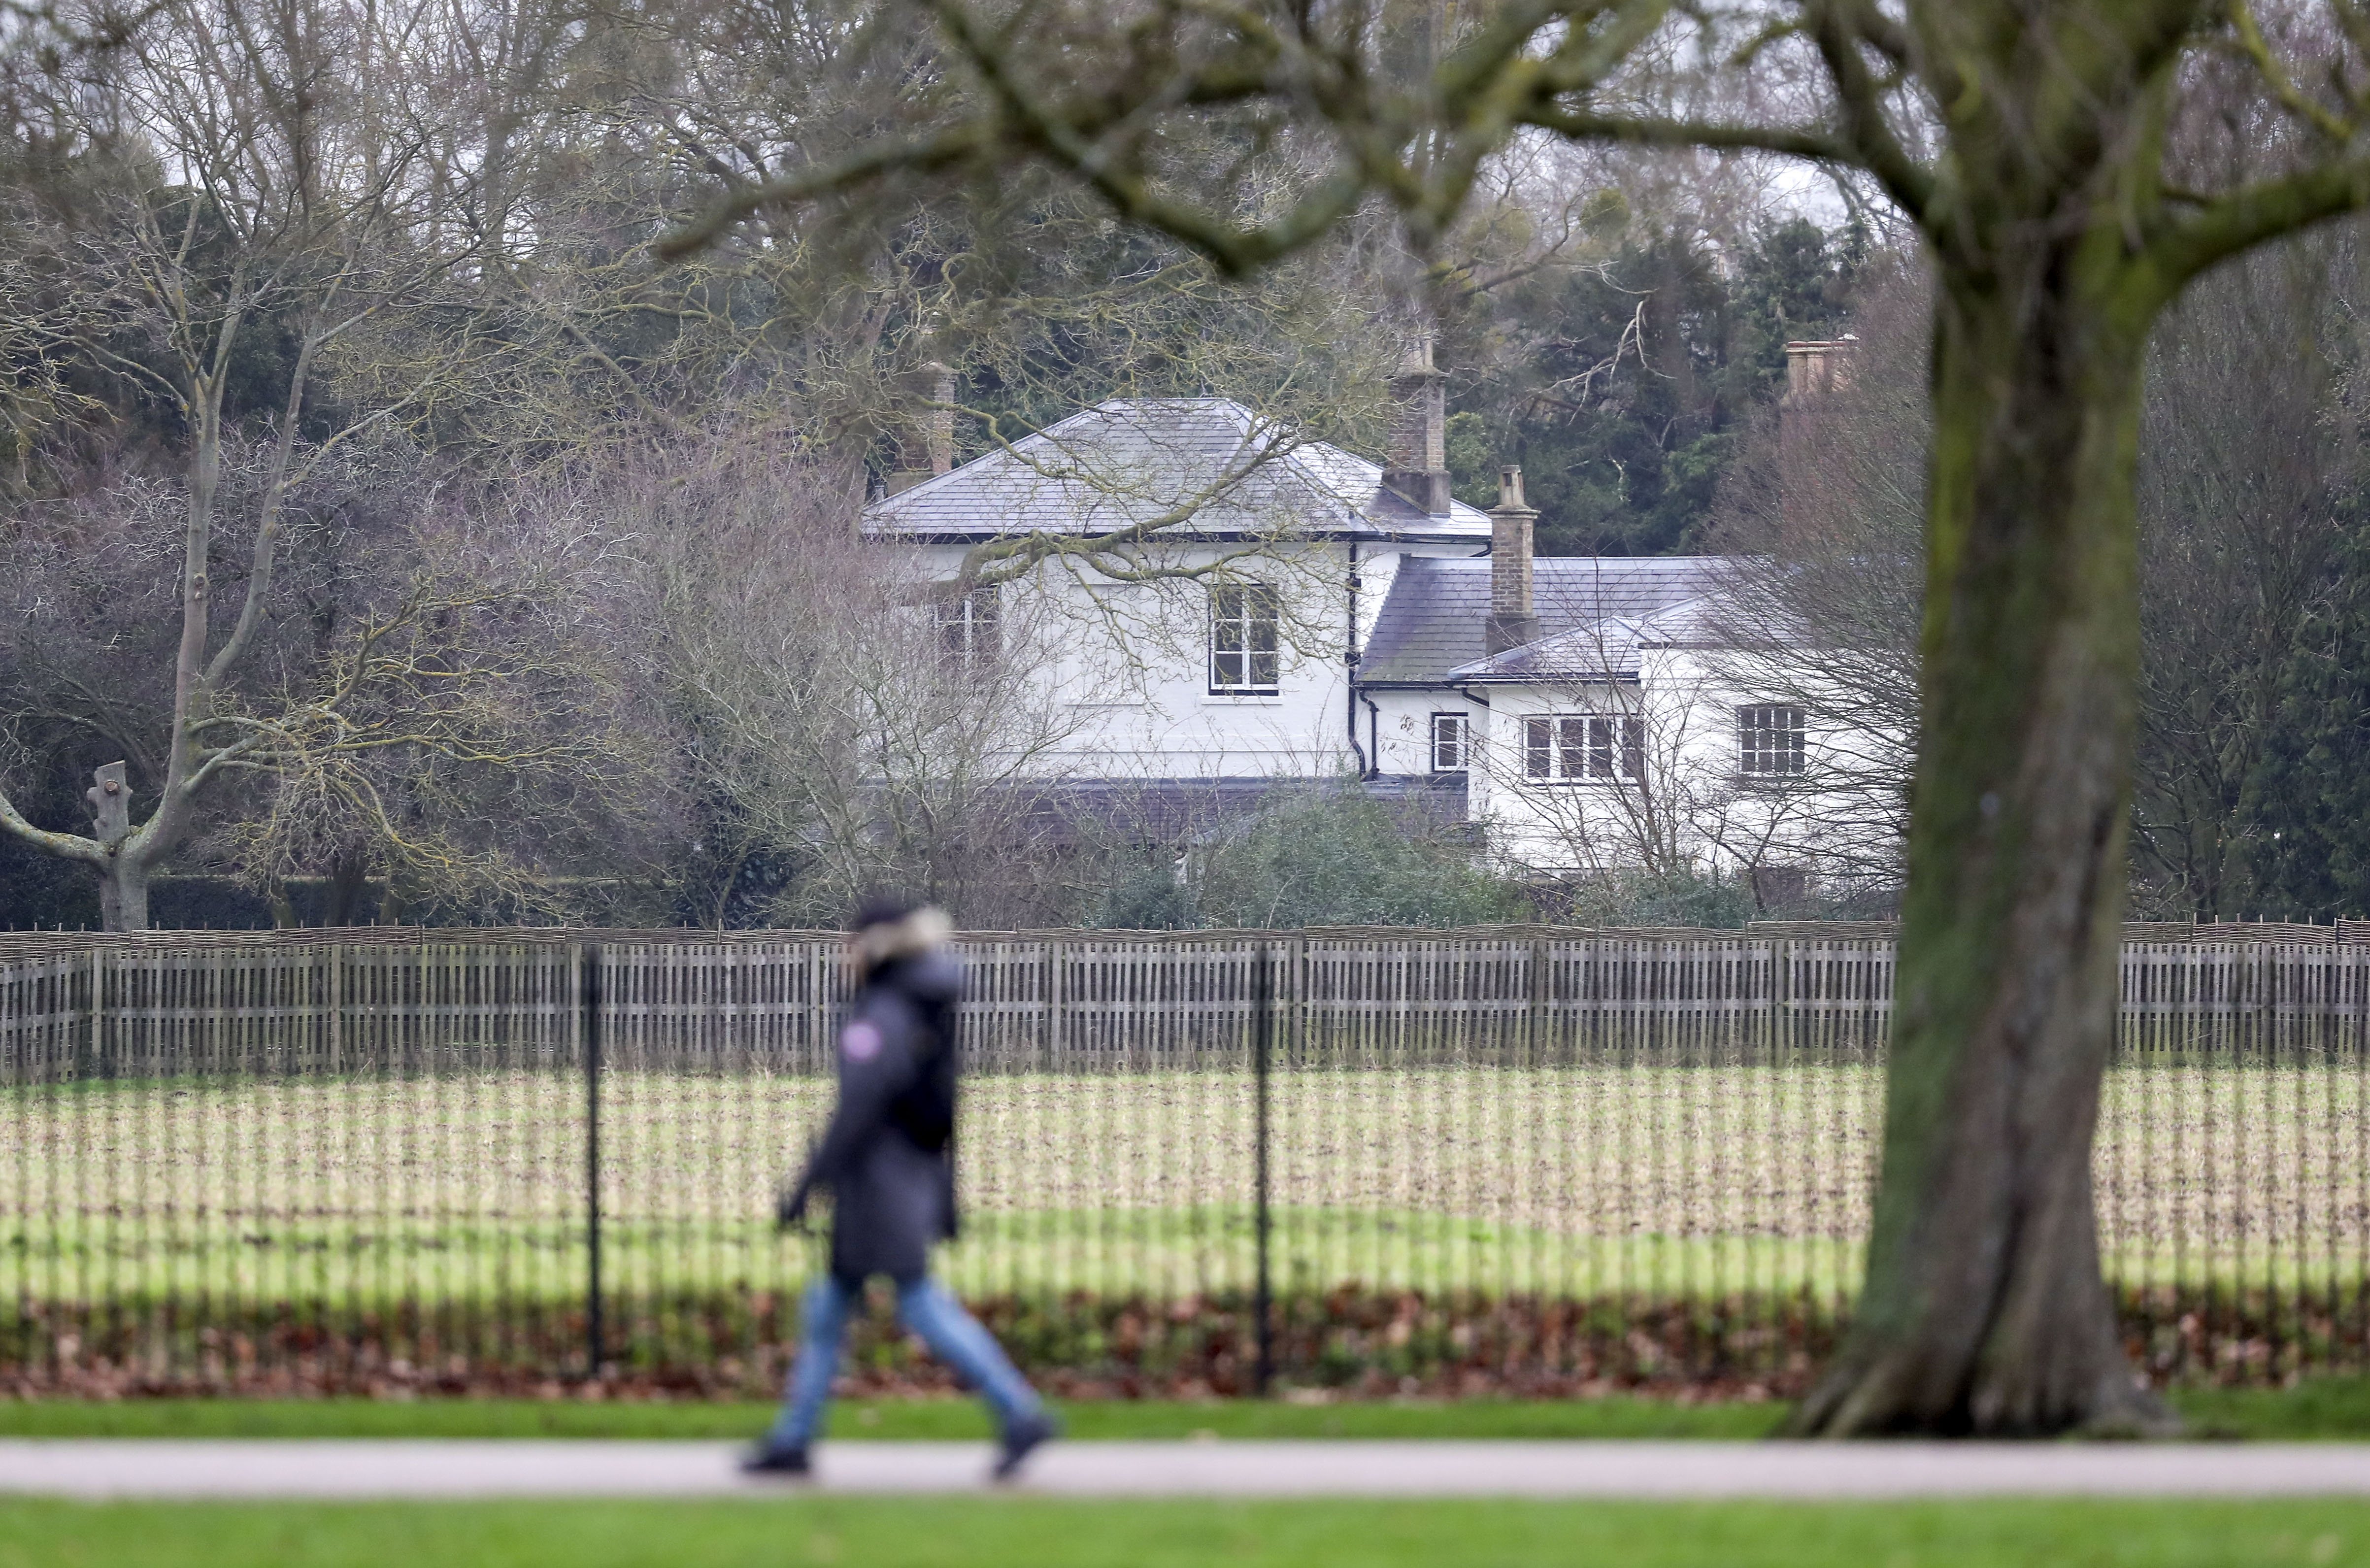 Prince Harry and Meghan Markle's Frogmore Cottage on the Home Park Estate pictured on January 14, 2020 in Windsor, England | Source: Getty Images